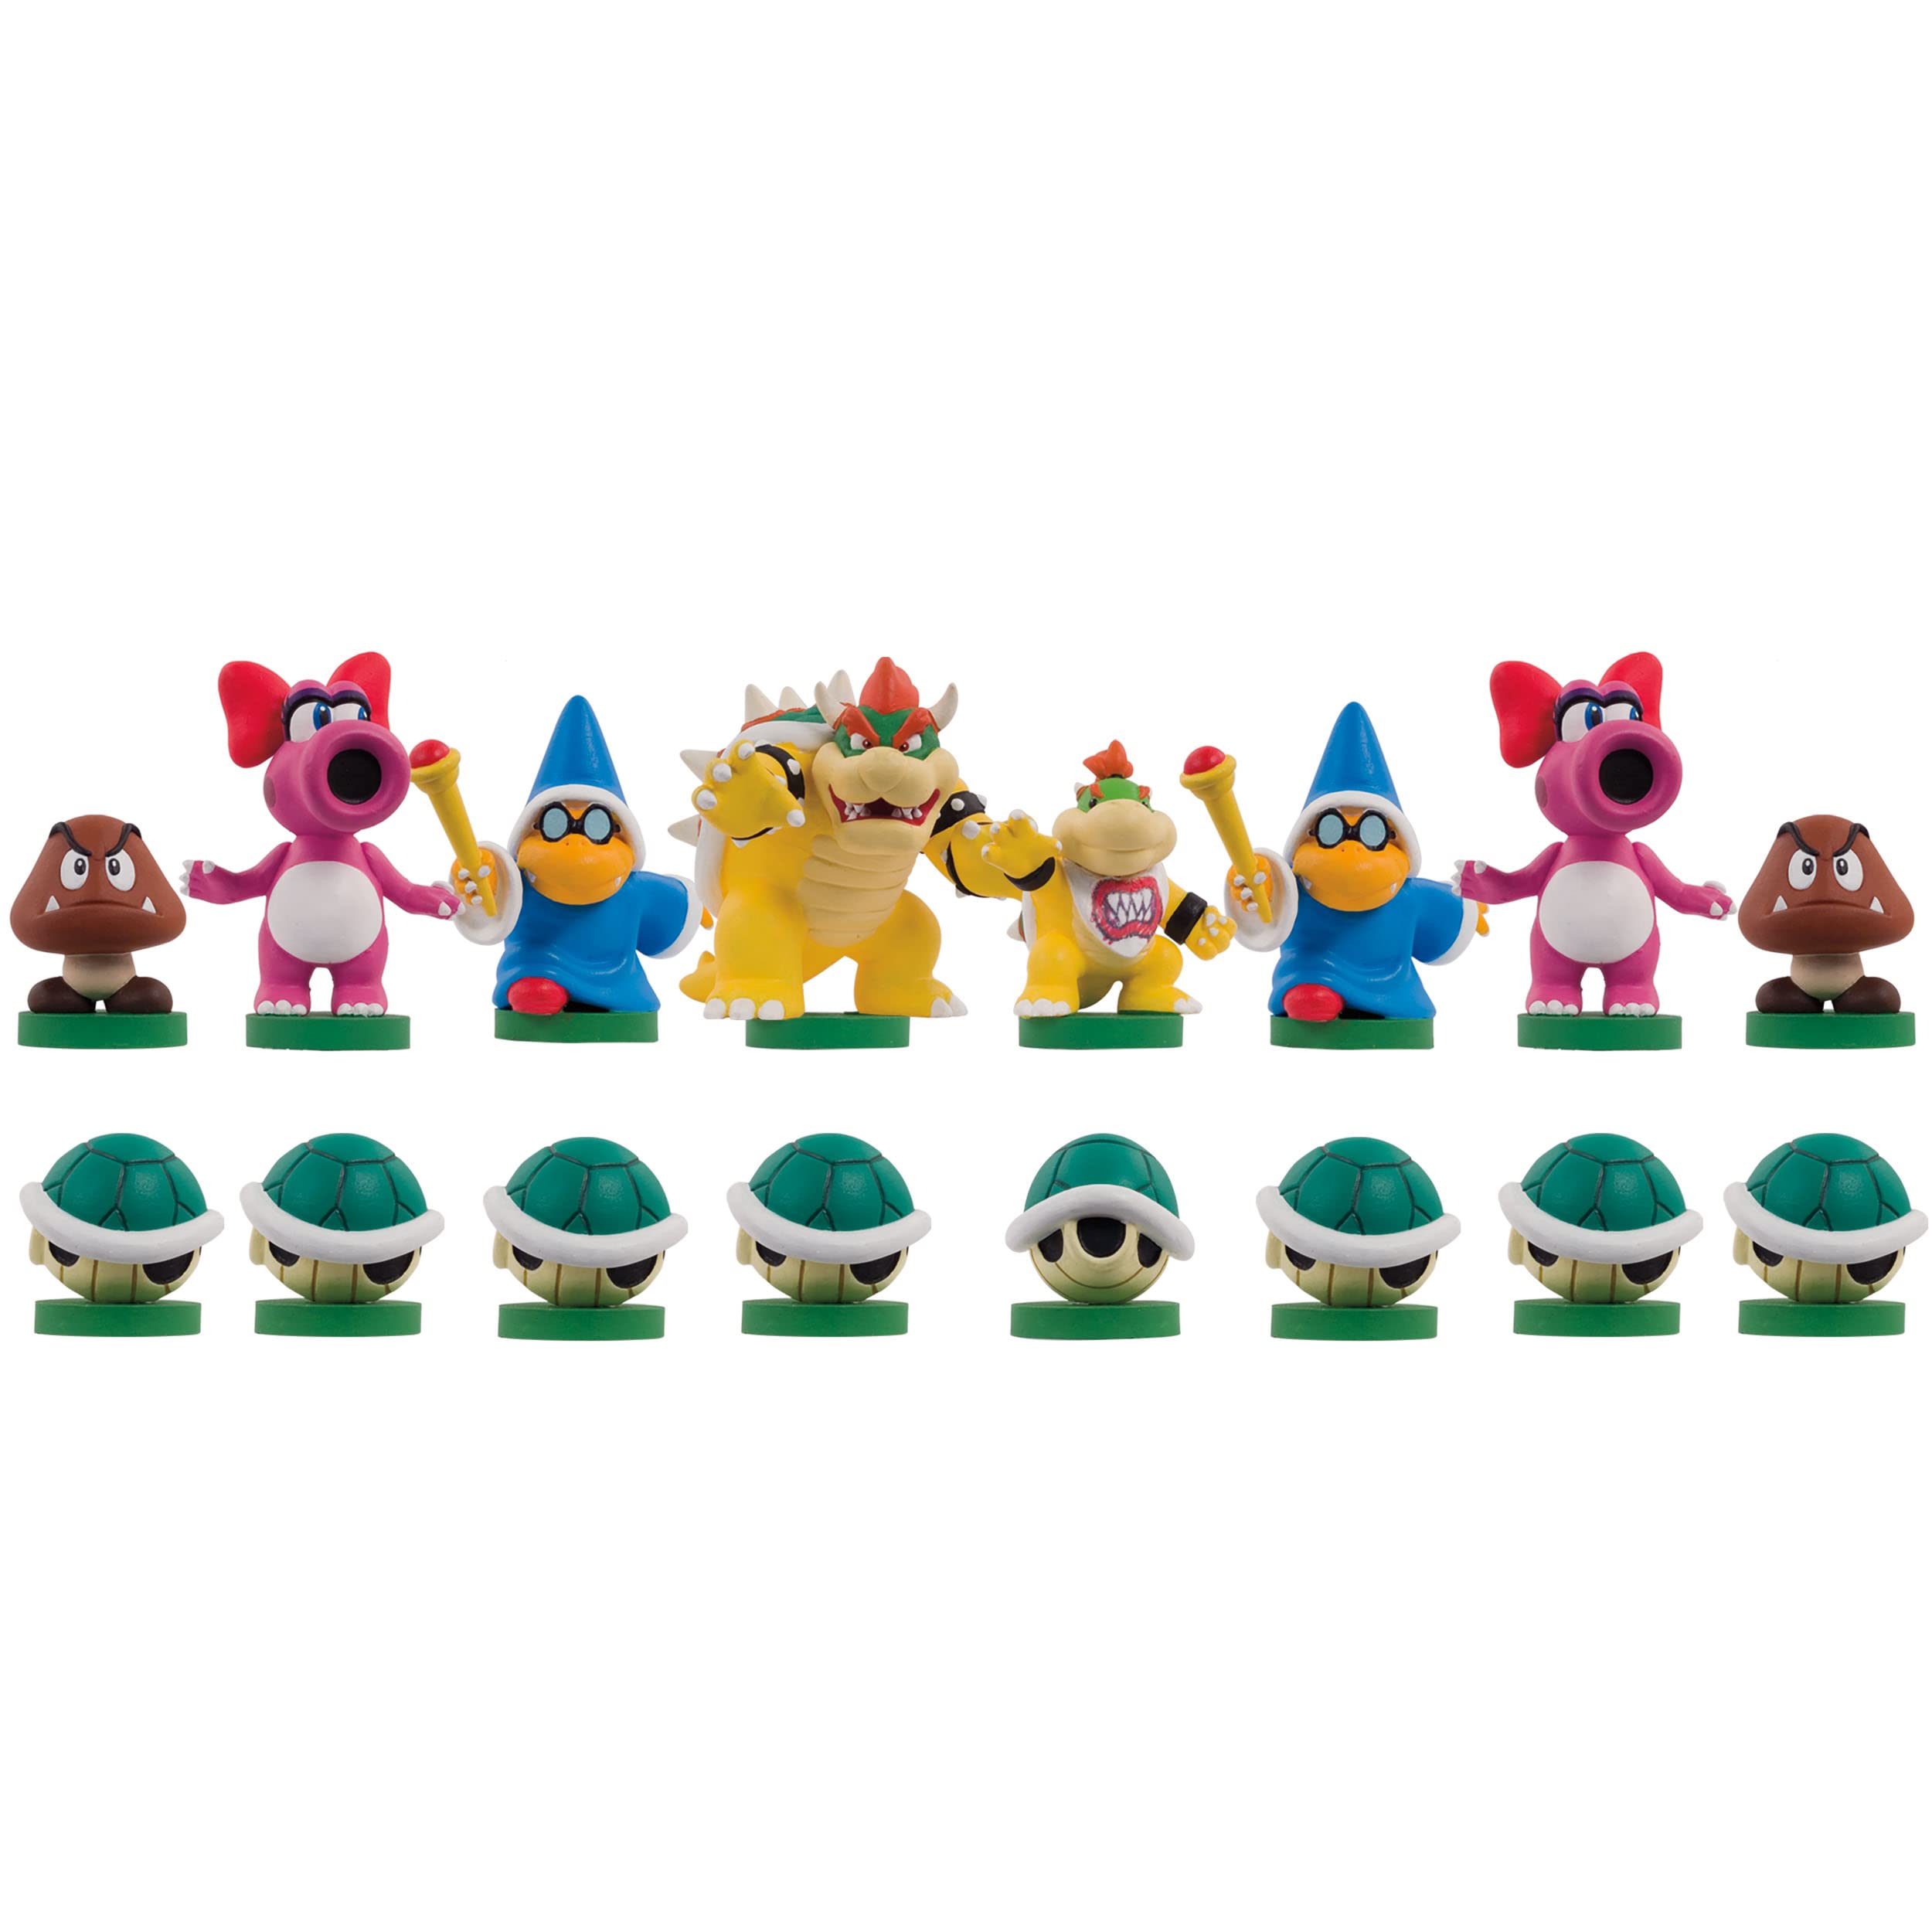 USAOPOLY Super Mario Chess Set | 32 Custom Scuplt Chesspiece for 2 players Including Iconic Characters Like Mario, Luigi, Peach, Toad, Bowser | Themed Chess Game from Nintendo Video Games